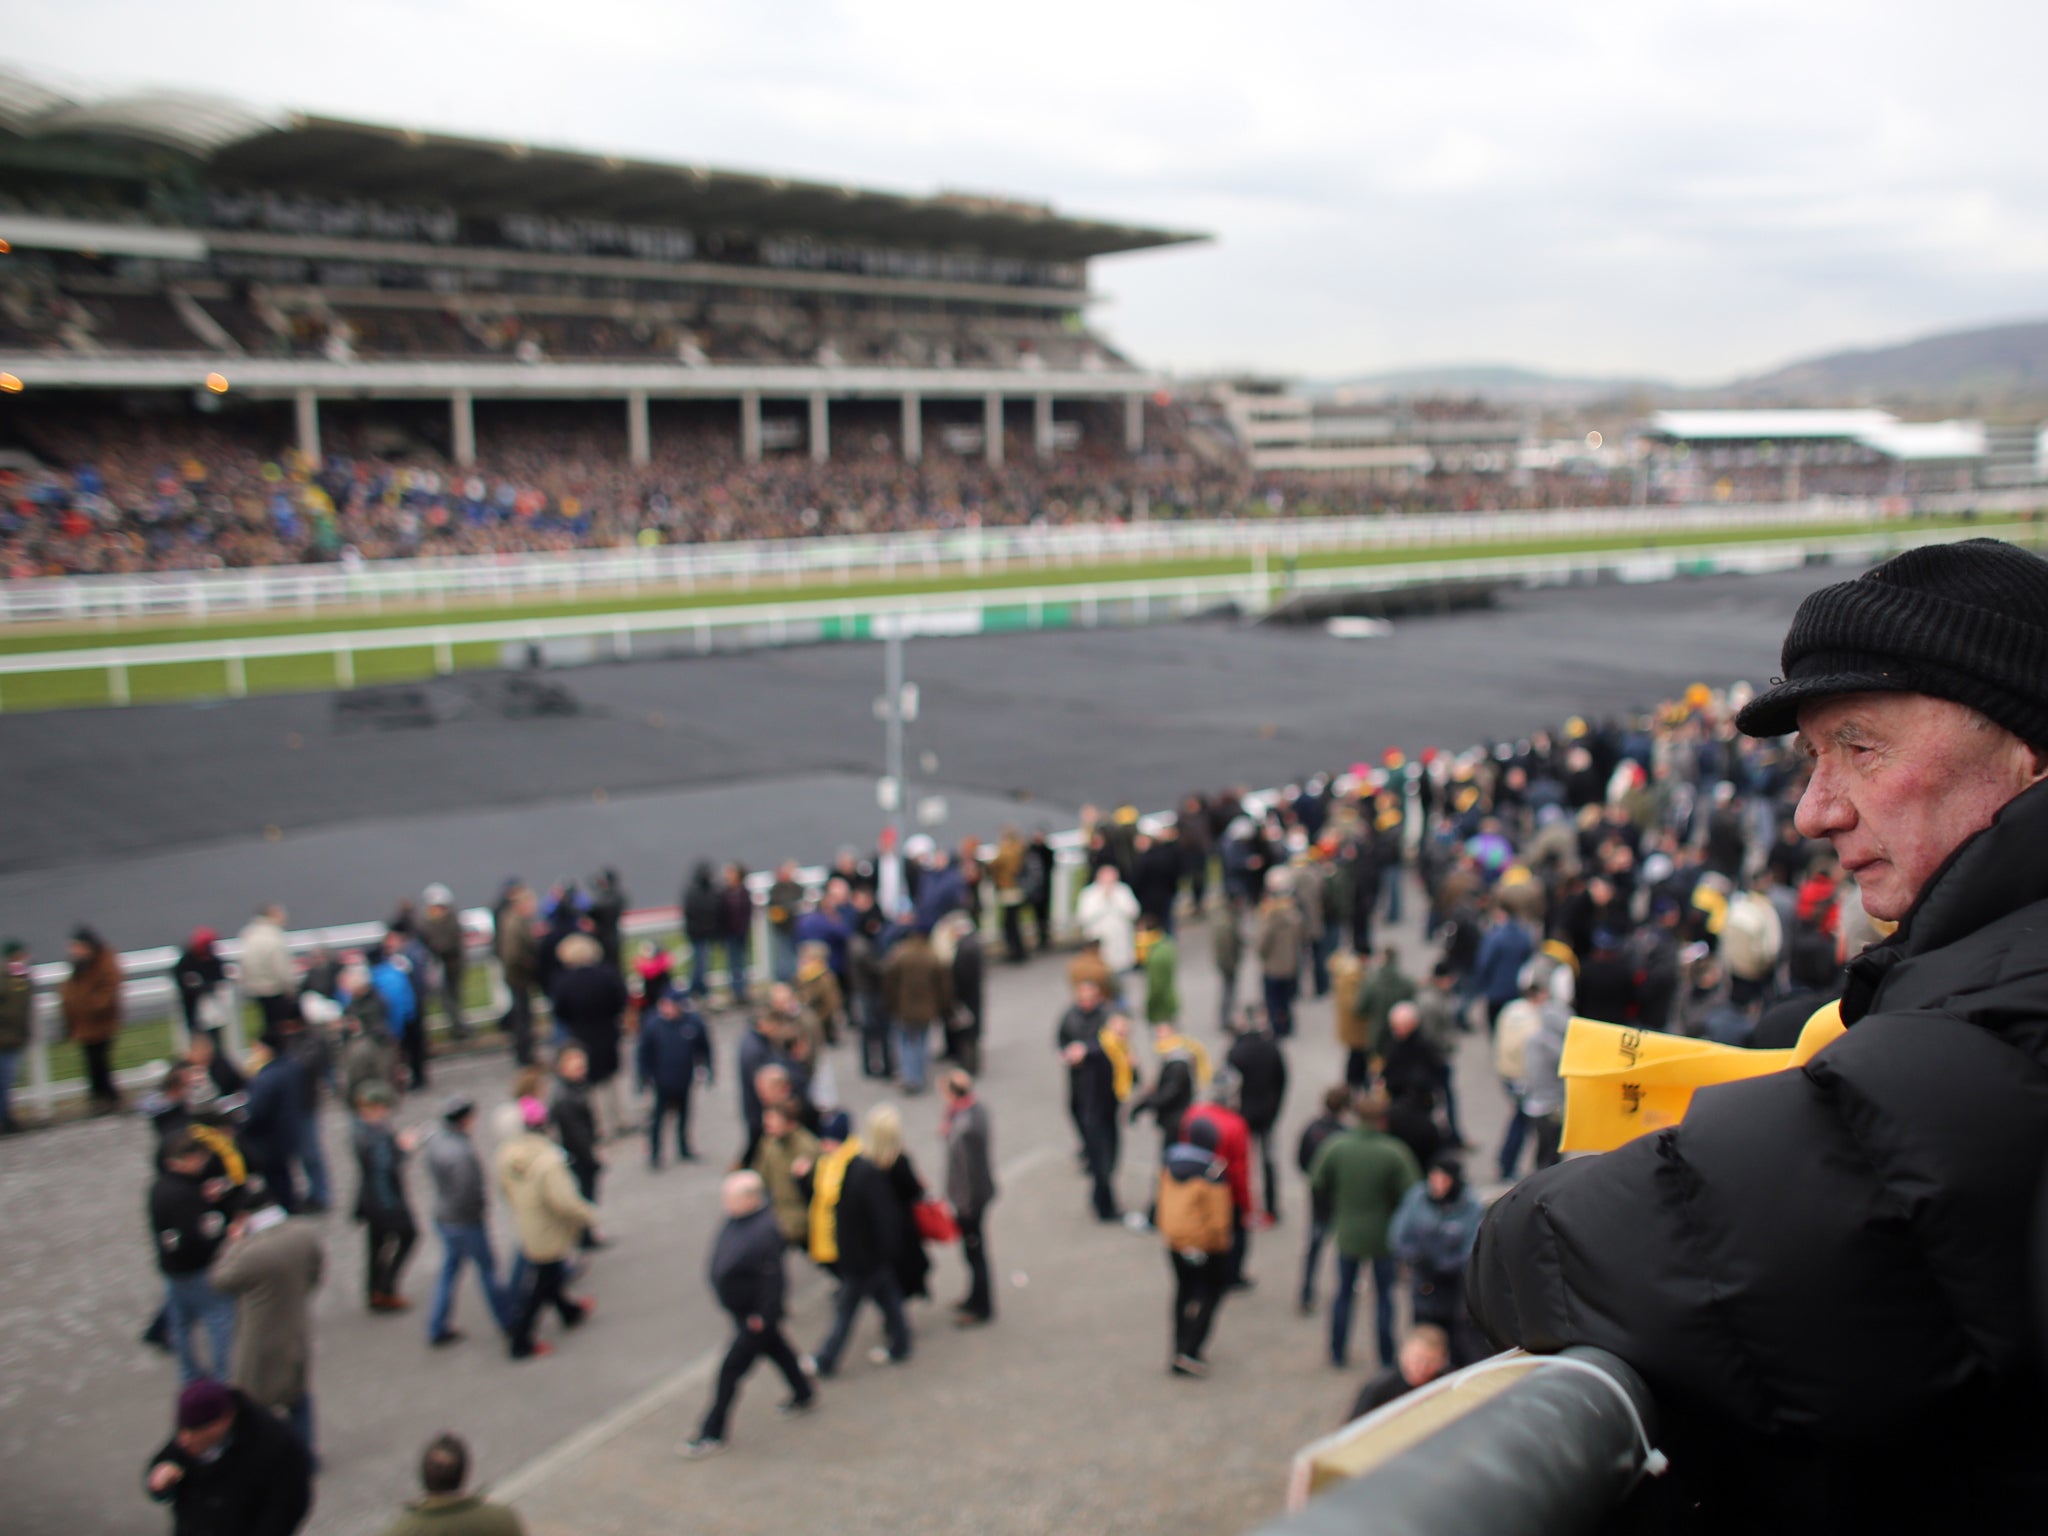 <p>March 12, 2013: Race goers wrap up in the cold at the Cheltenham racecourse on the first day of the Festiva</p>